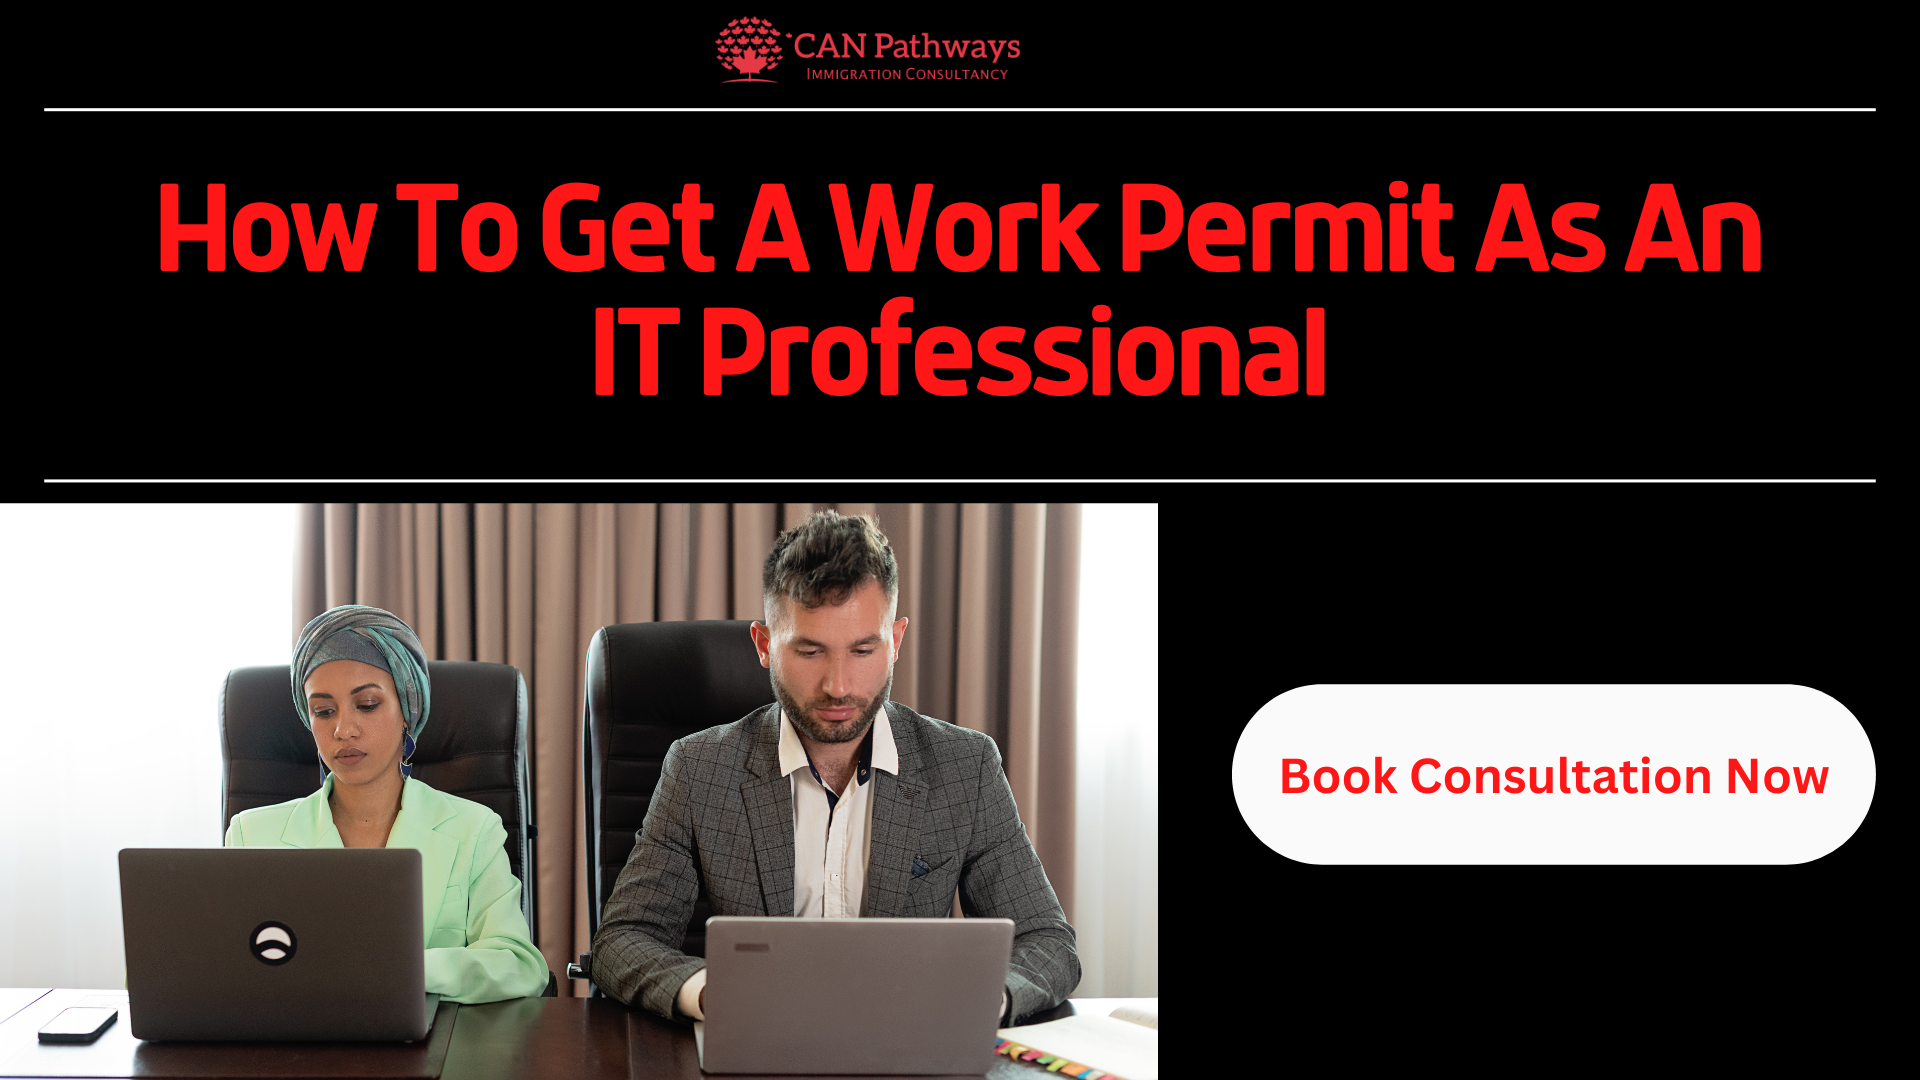 A Work Permit As An IT Professional